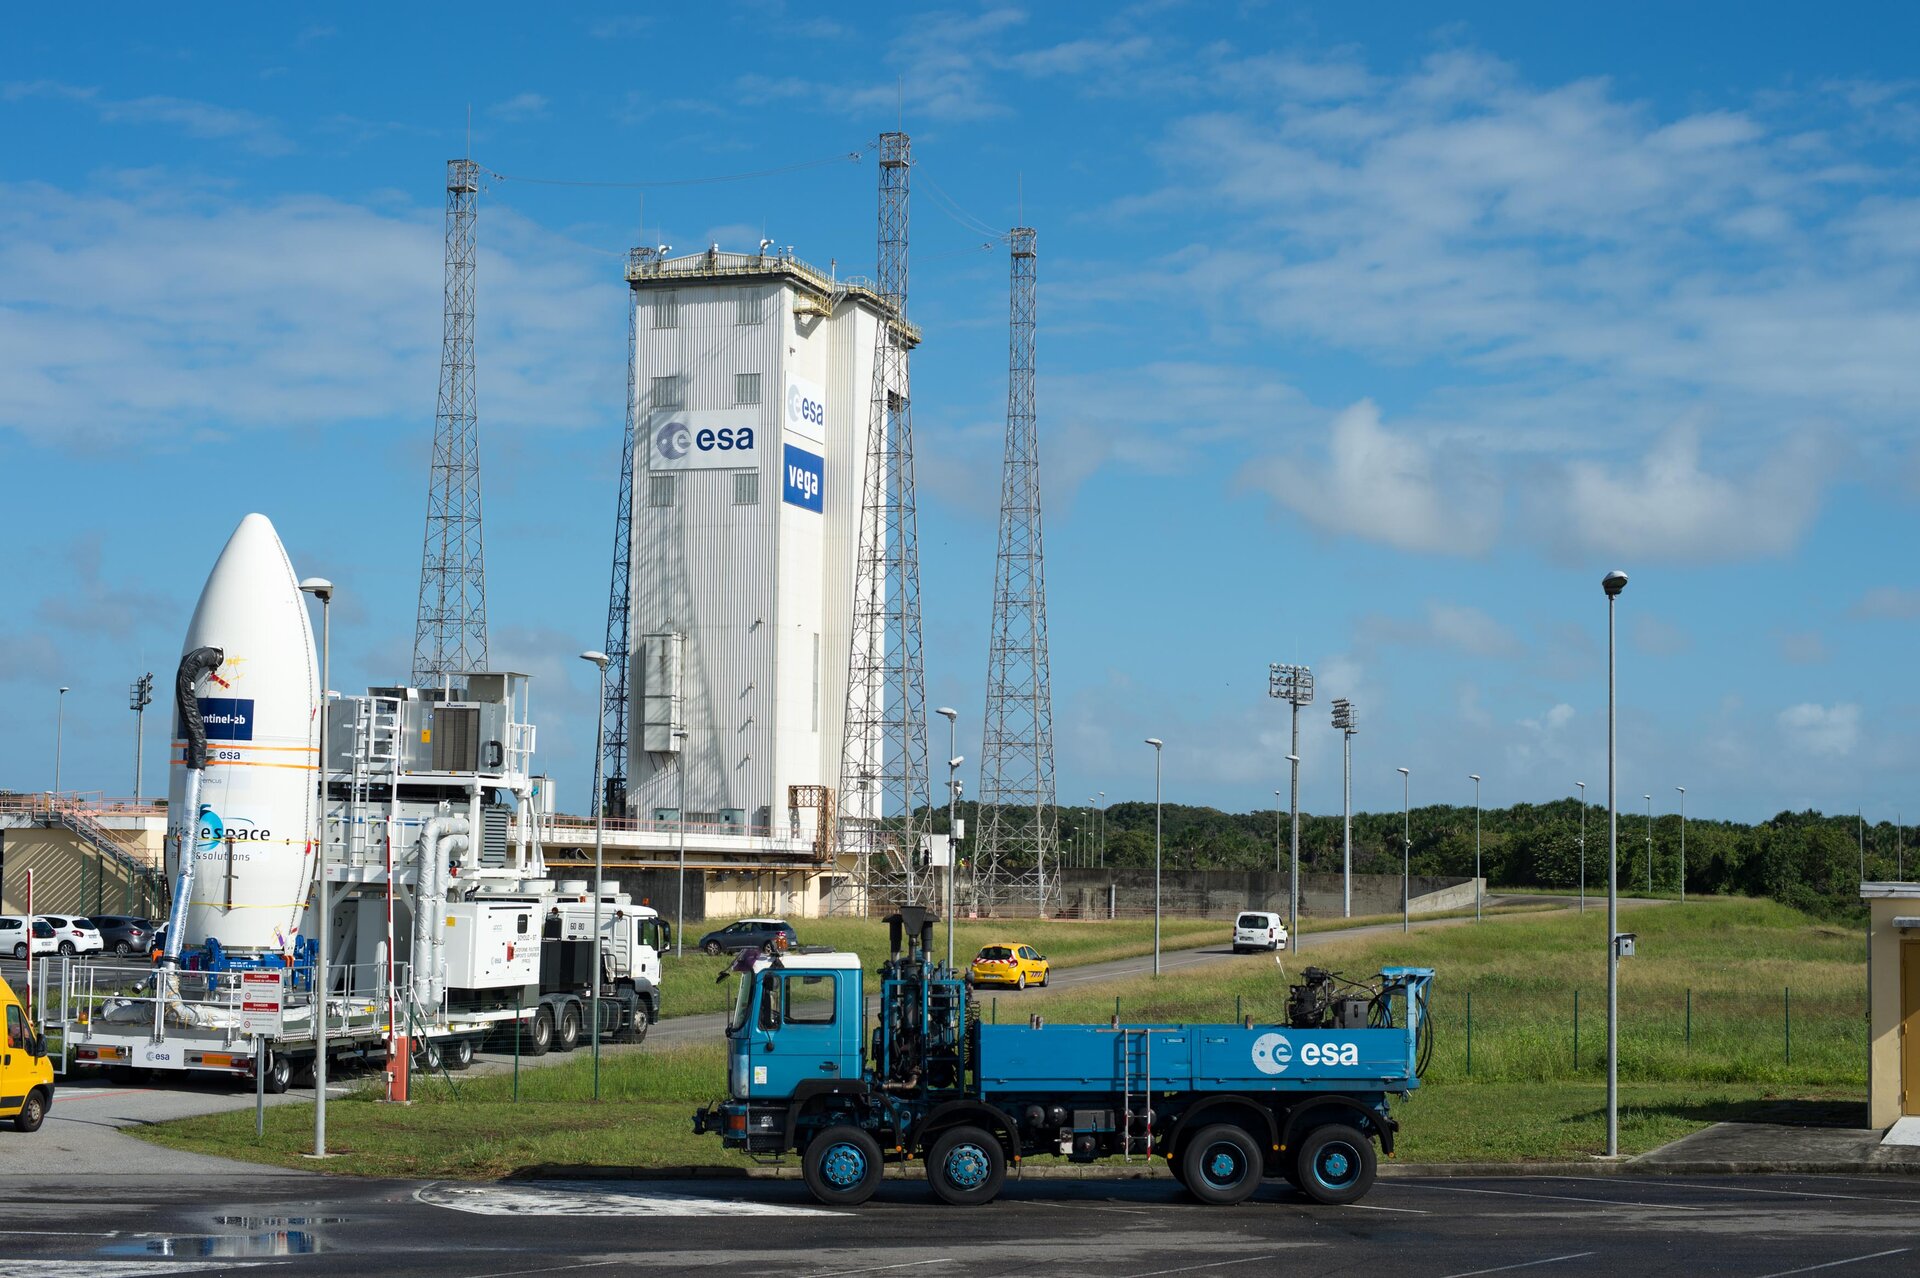 Sentinel-2B on the launch pad